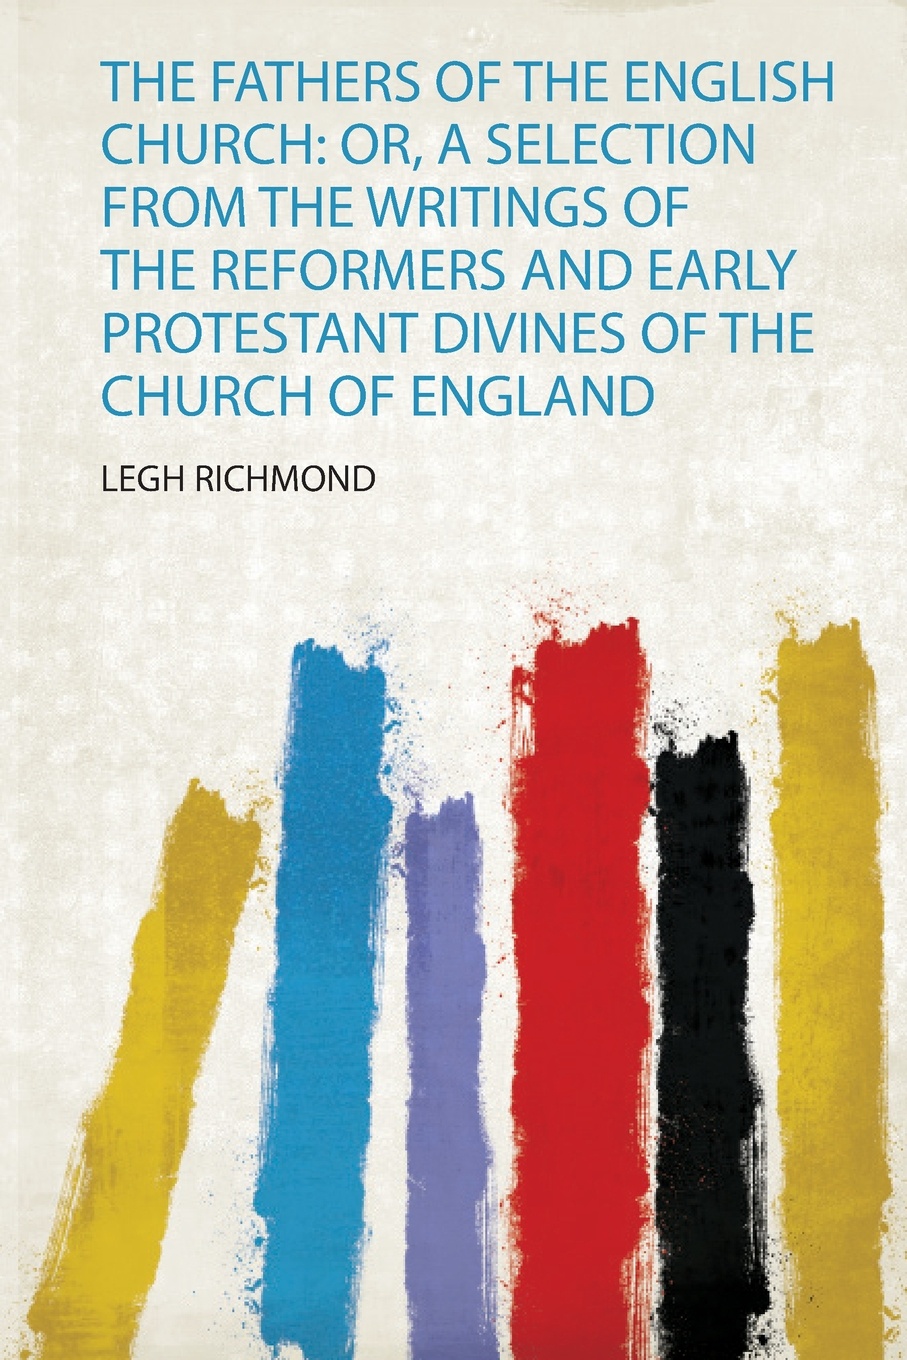 The Fathers of the English Church. Or, a Selection from the Writings of the Reformers and Early Protestant Divines of the Church of England